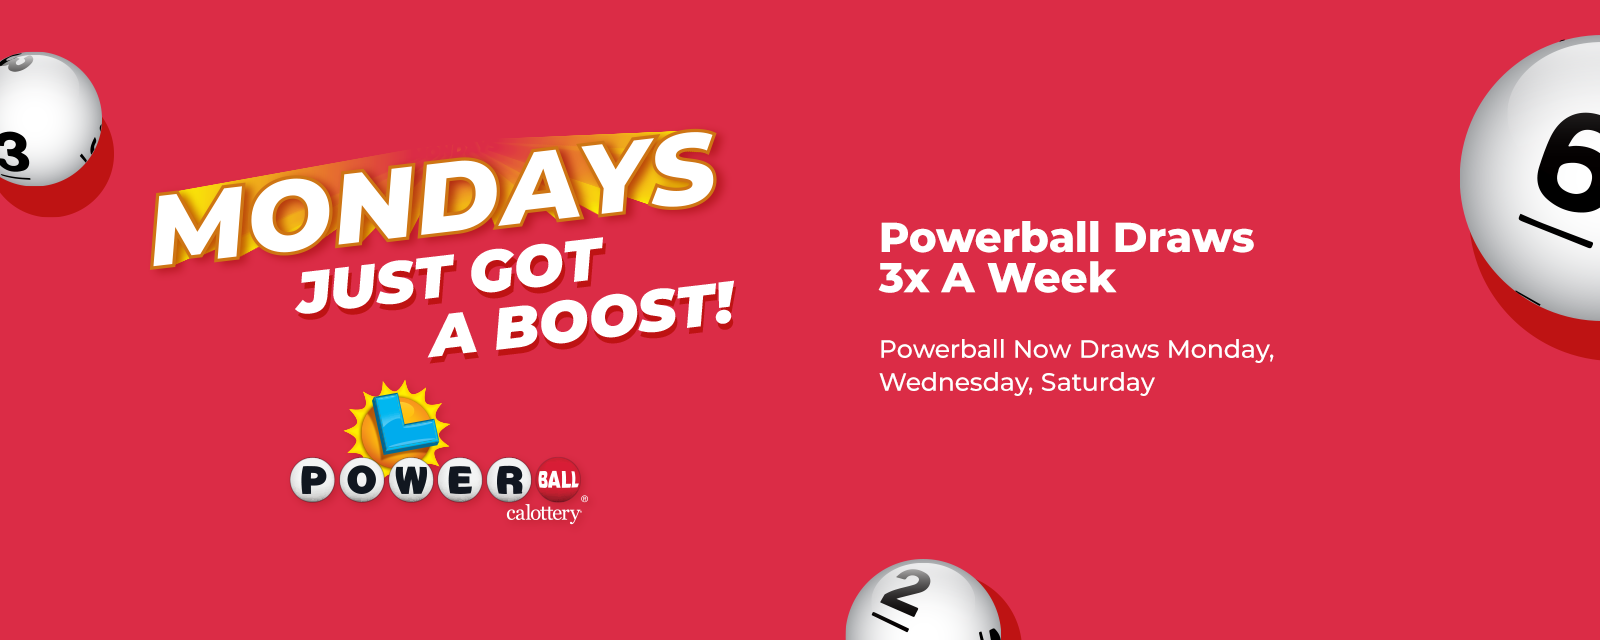 Monday Just Got A Boost. Powerball Now Draw Monday, Wednesday, Saturday